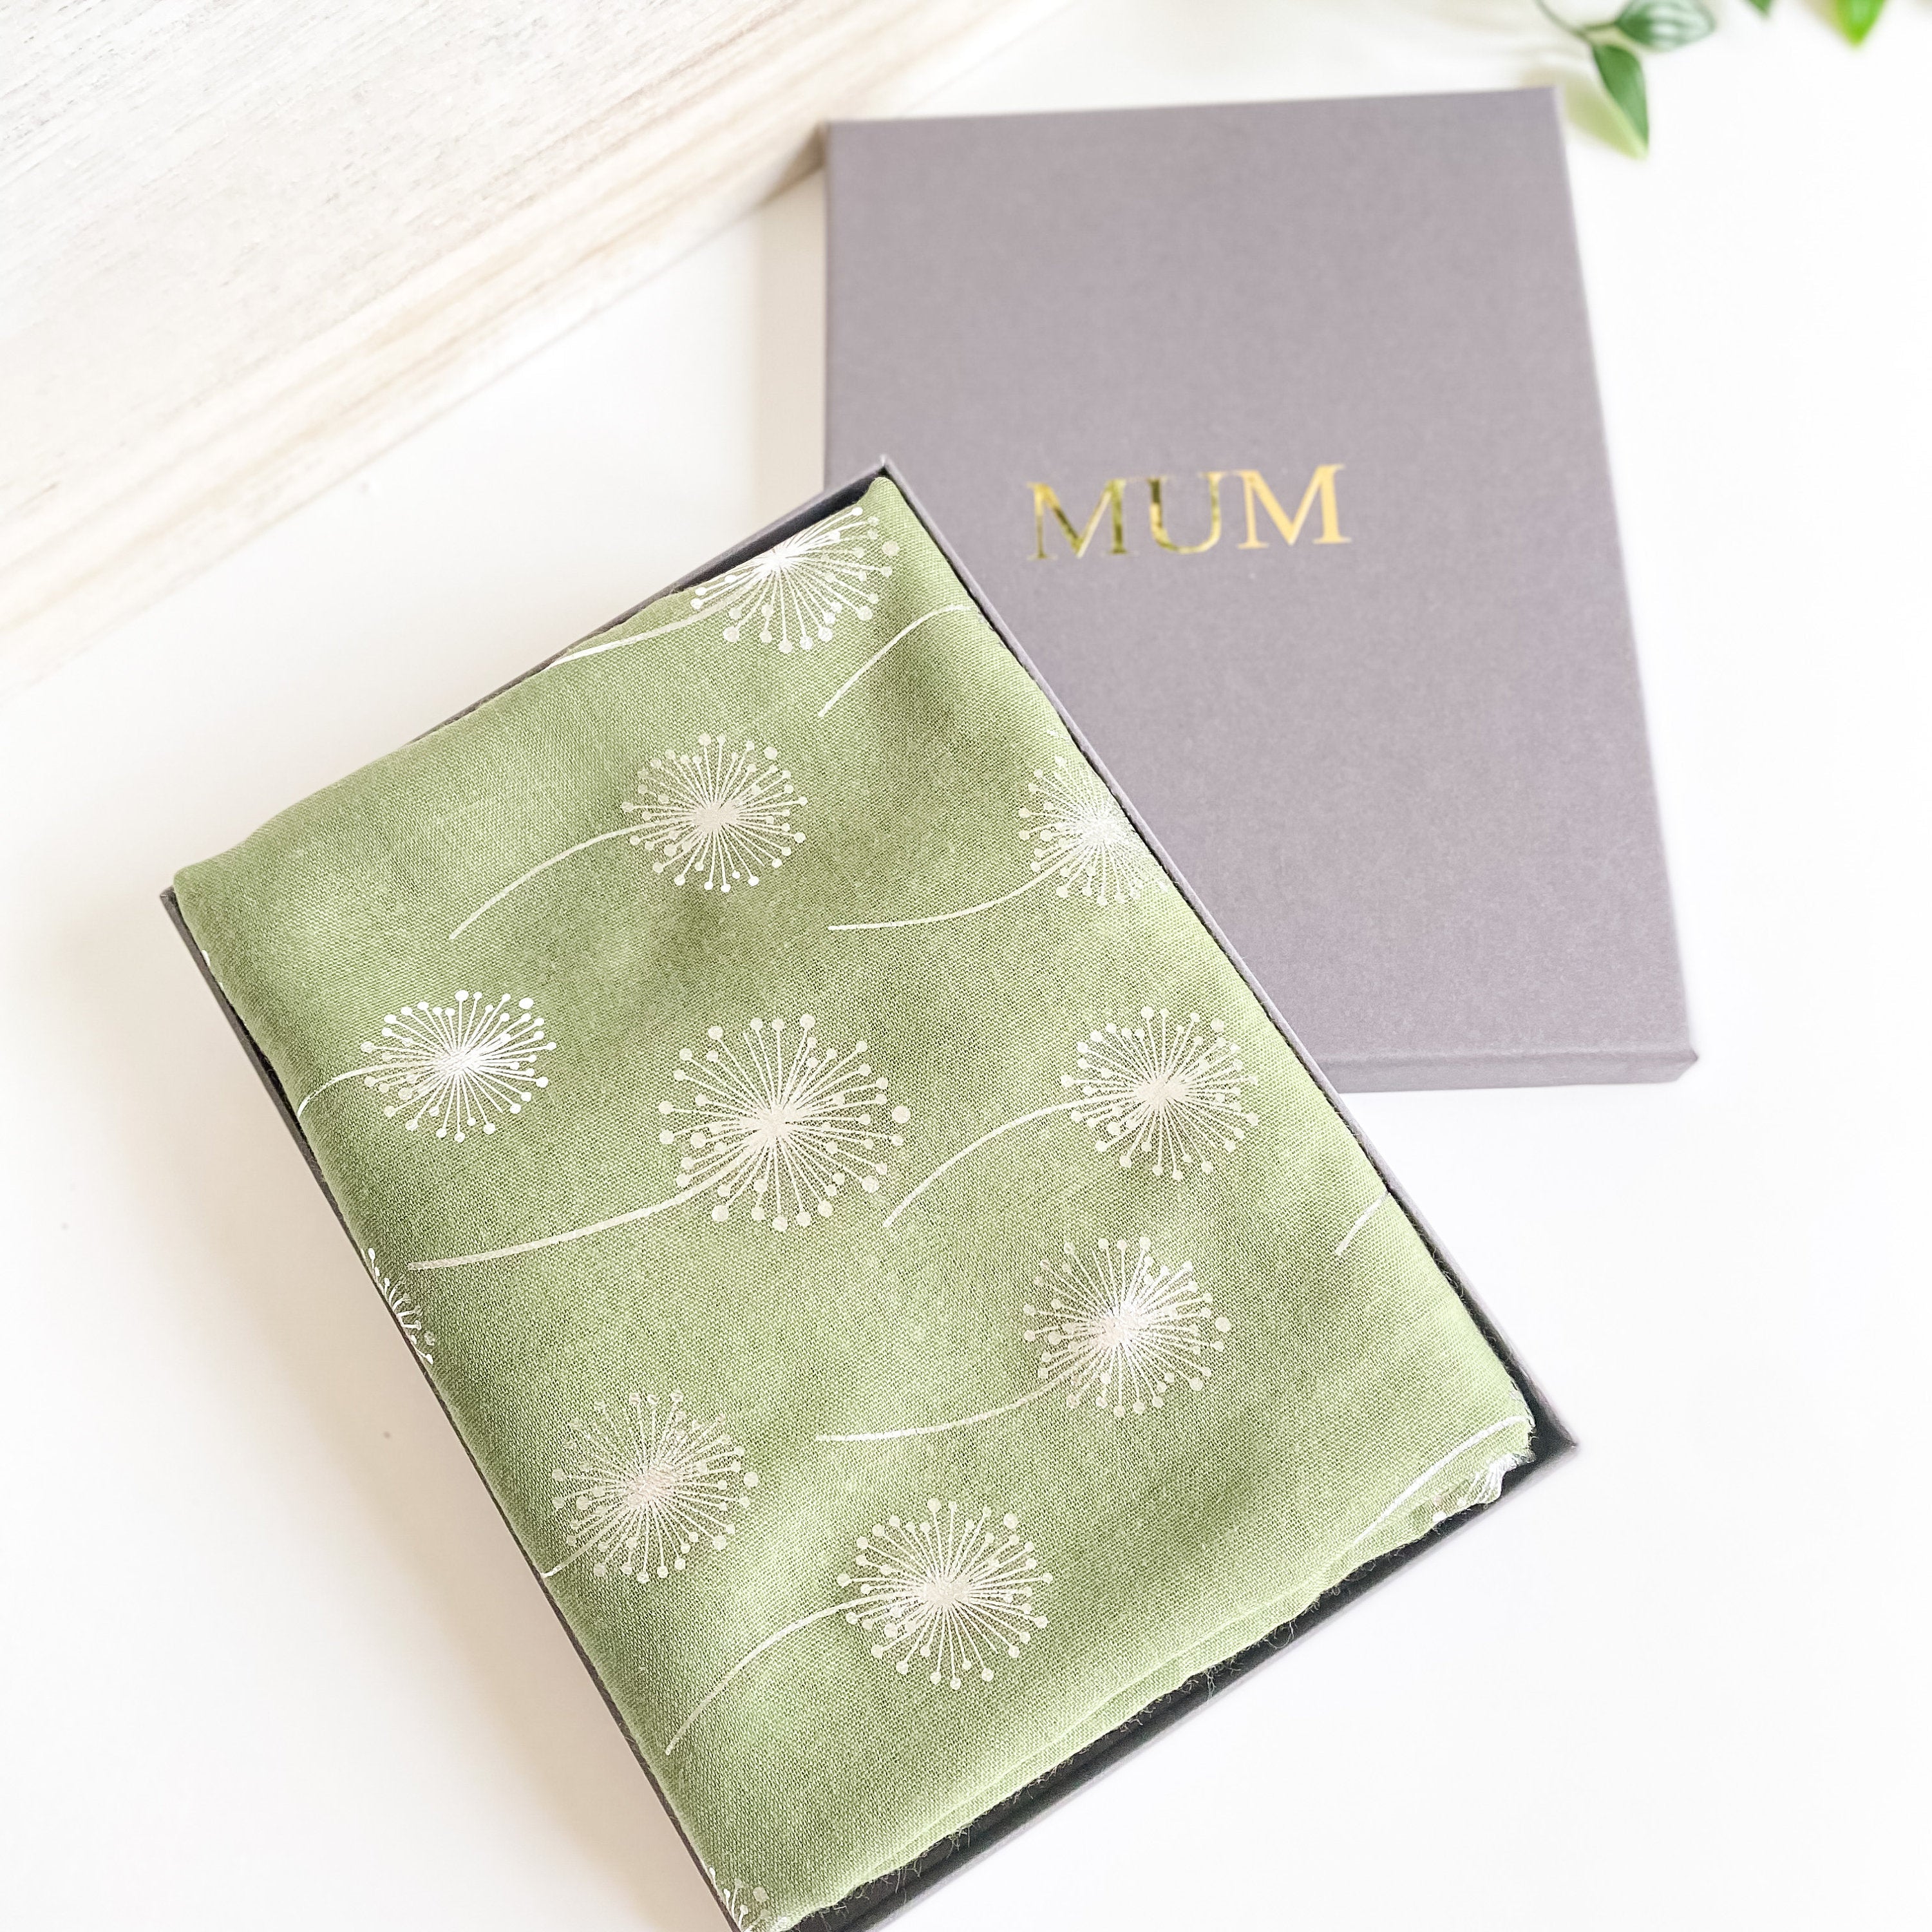 Dandelion Foil Print Cotton Scarf In A Personalised Gift Box, 6 Colours, Gift For Mum, Scarves For Women